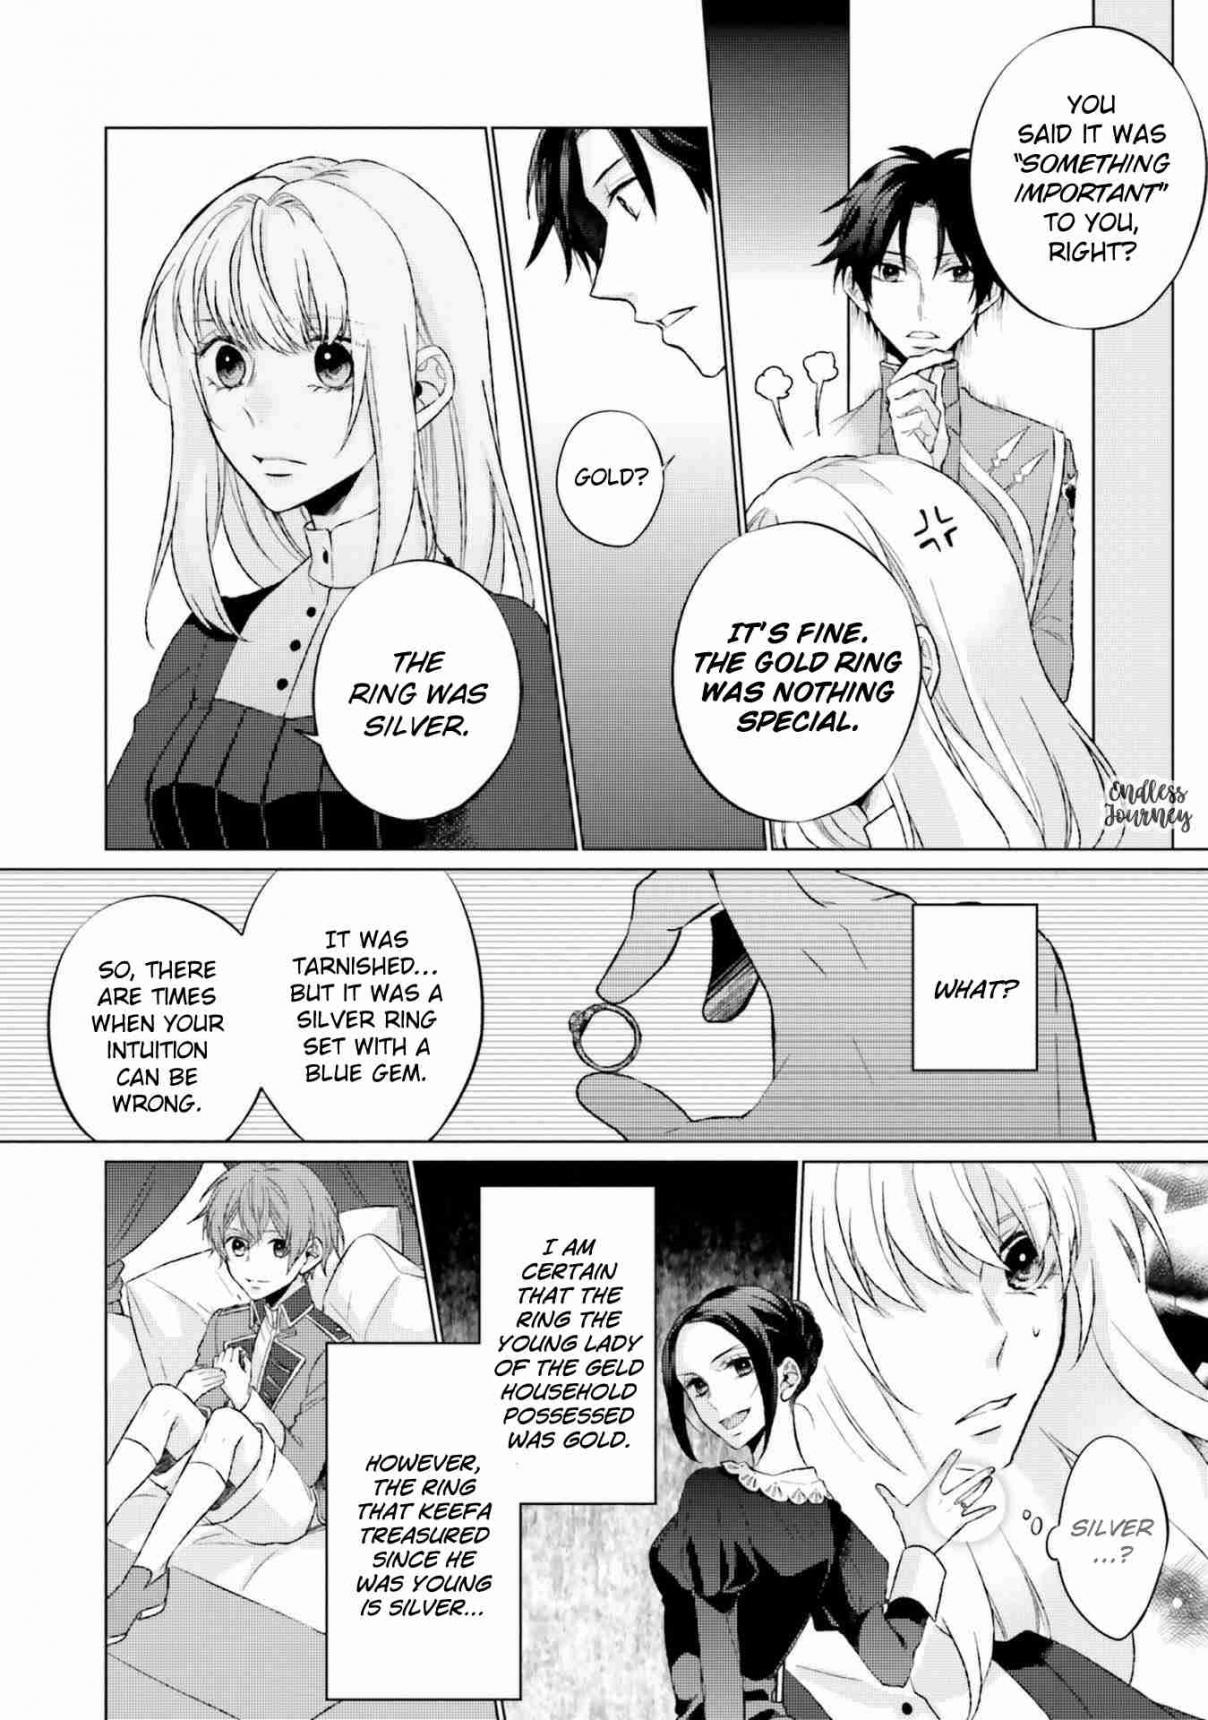 Since I Became a Saint, I'll Do Whatever I Want with My Second Life ~The Prince Was My Lover Who Threw Me Away in My Previous Life~ Vol. 2 Ch. 5